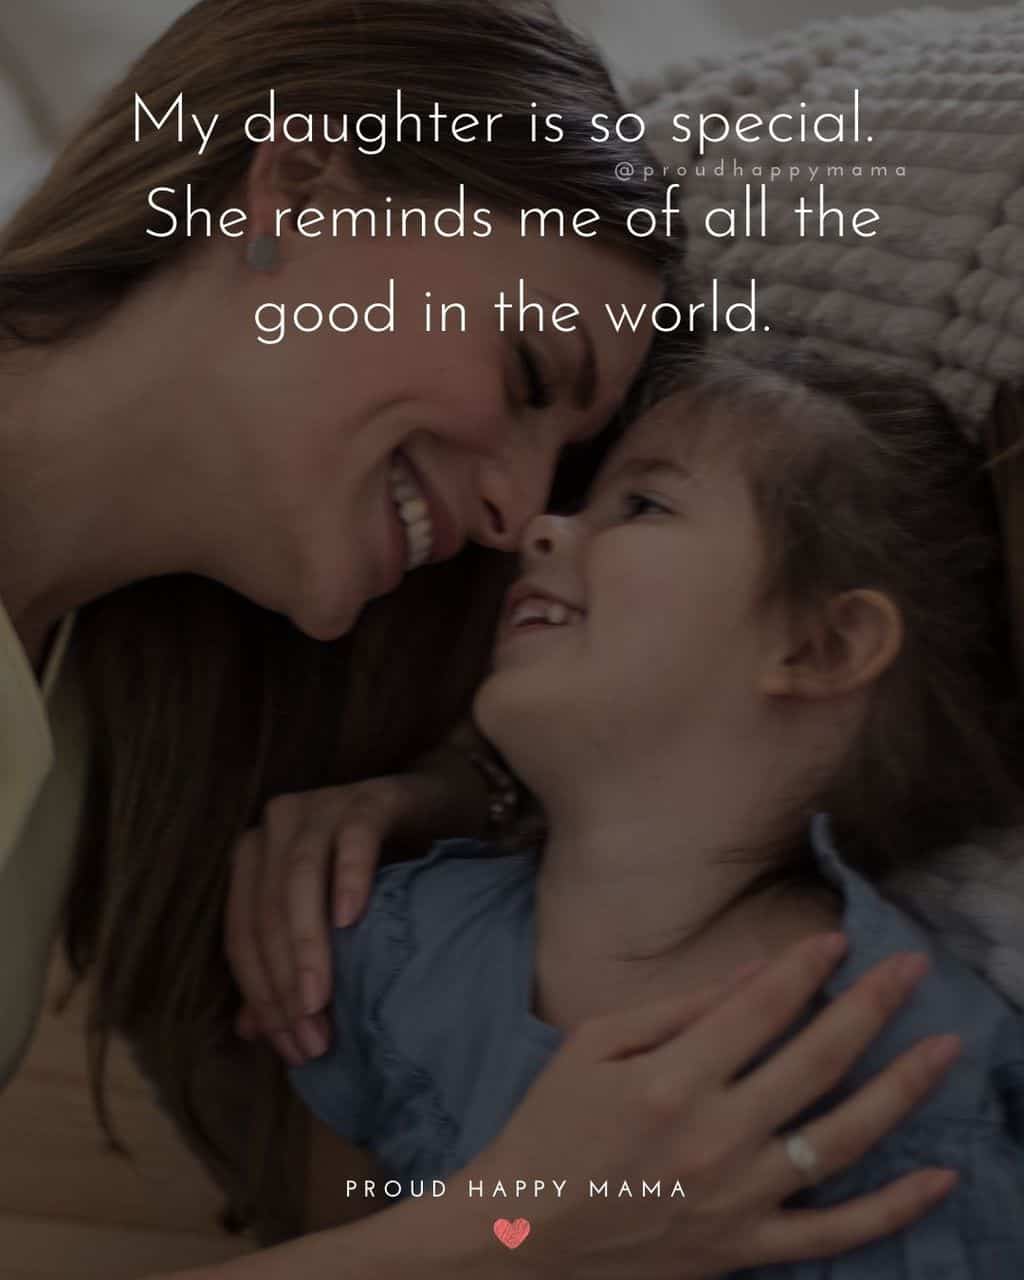 quote to my daughter - ‘My daughter is so special. She reminds me of all the good in the world.’